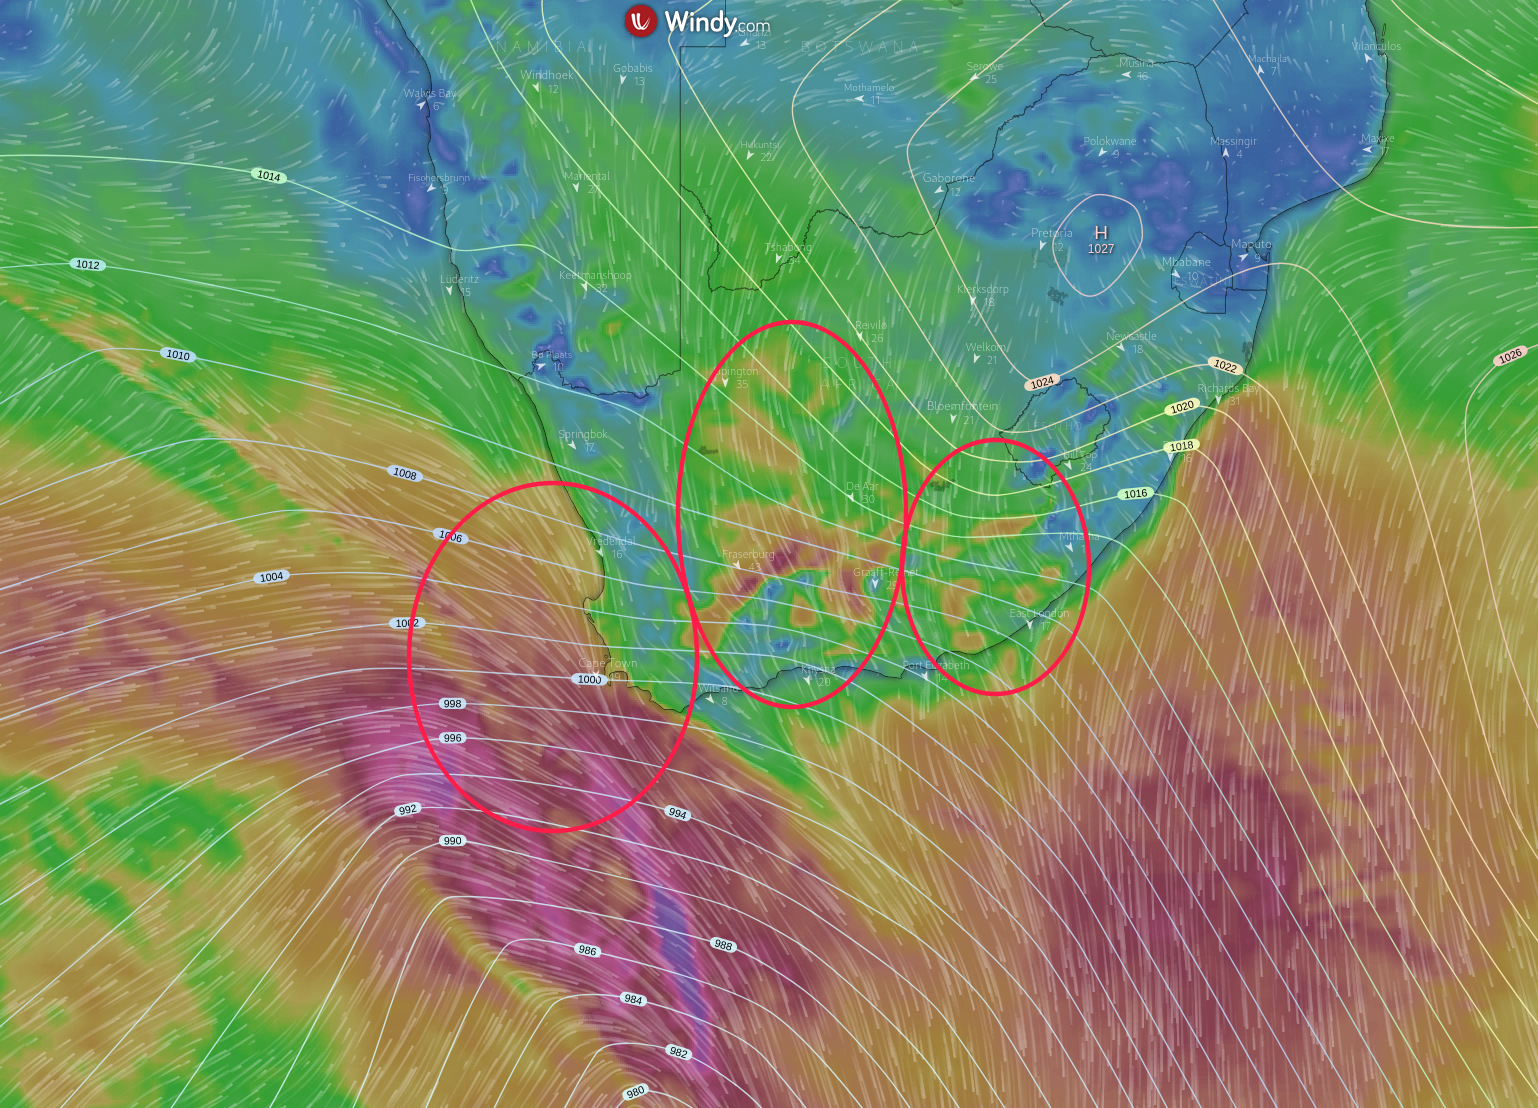 Gale force winds start to blow across the interior and coastline of South Africa as massive #coldfronts approach